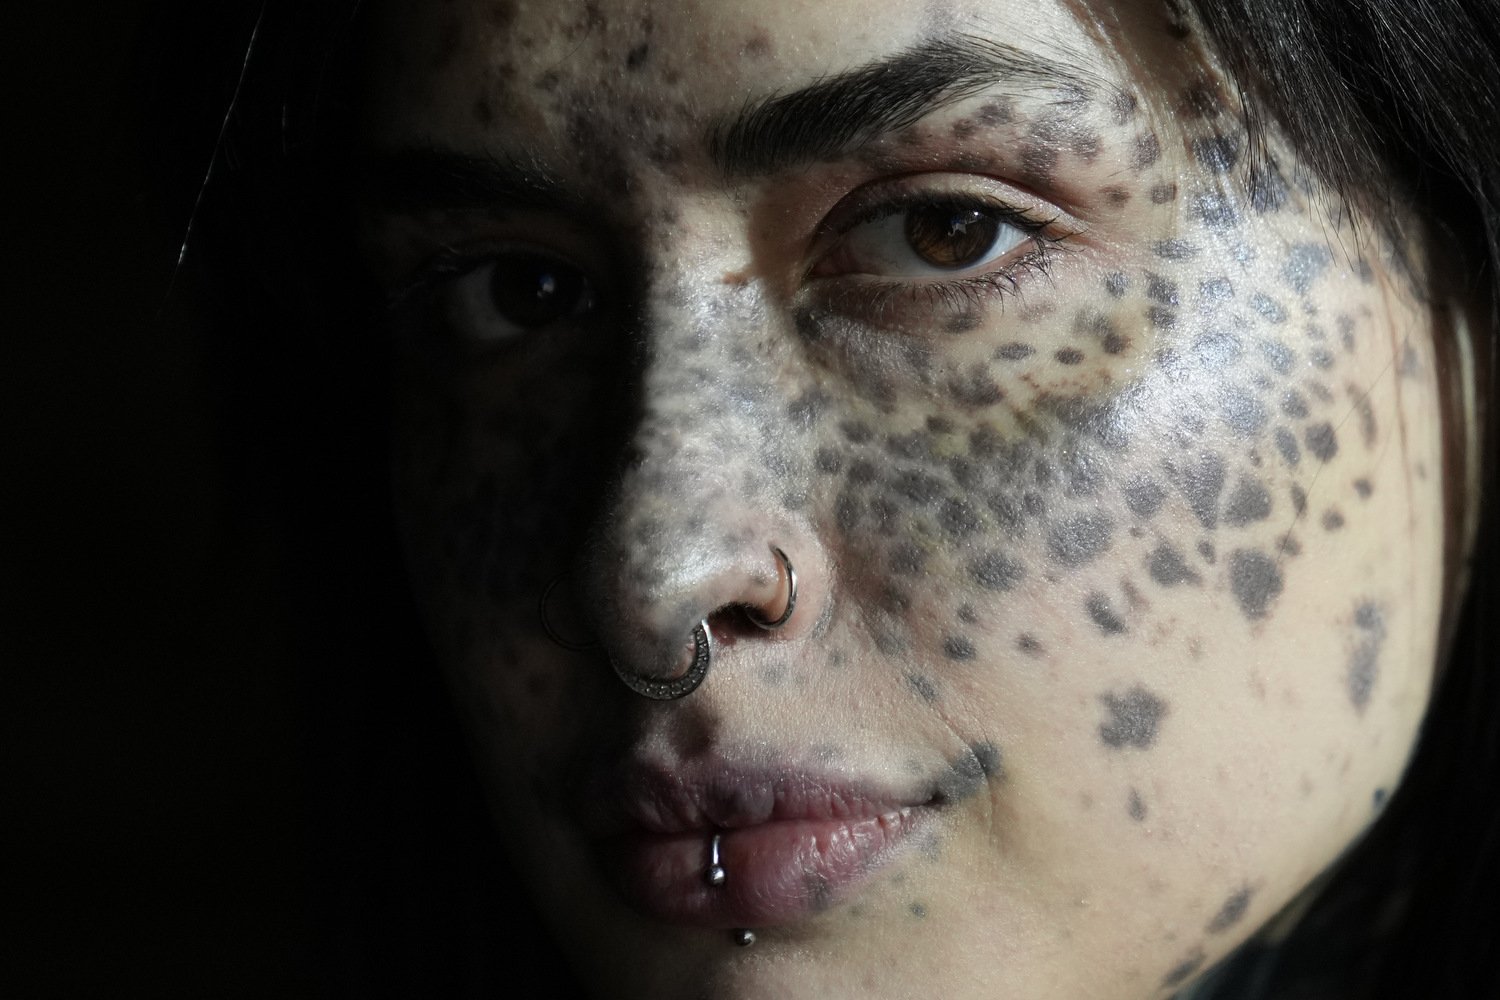  Sonia Sparta poses during a photo shoot for "L'imperfetta (The Imperfect) model agency" in Rome, Tuesday, Feb. 7, 2023. Sonia has a rare skin disorder called hyperpigmentation, which produces dark spots on her face and body. 